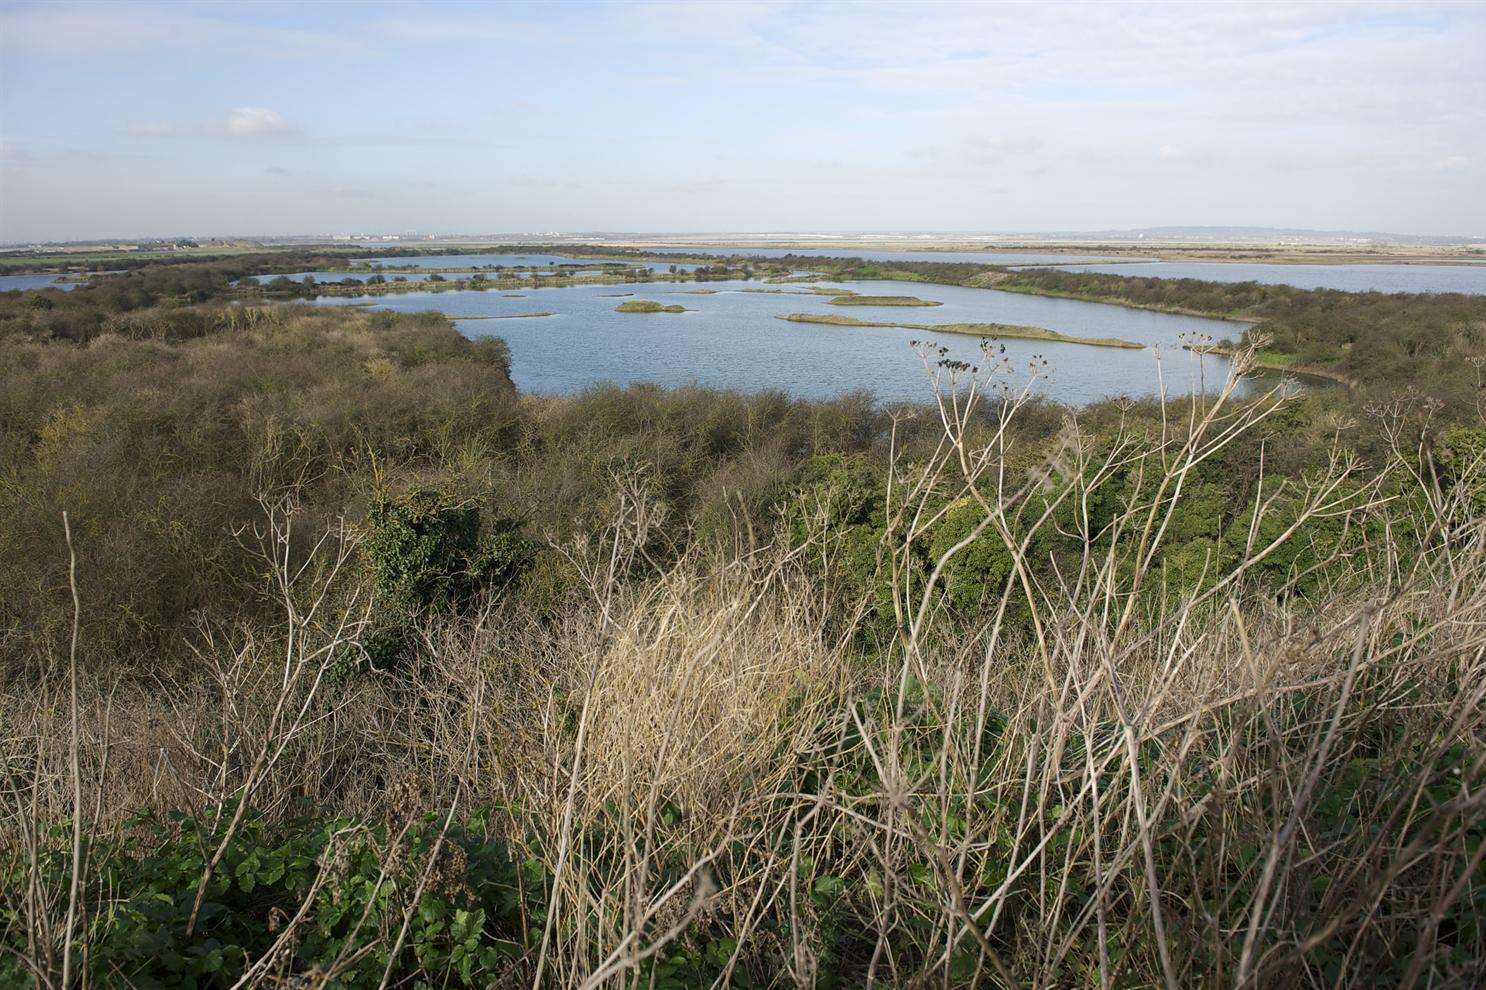 View from The Pinnacle over Cliffe Pools which will be affected by the proposed Estuary Airport.